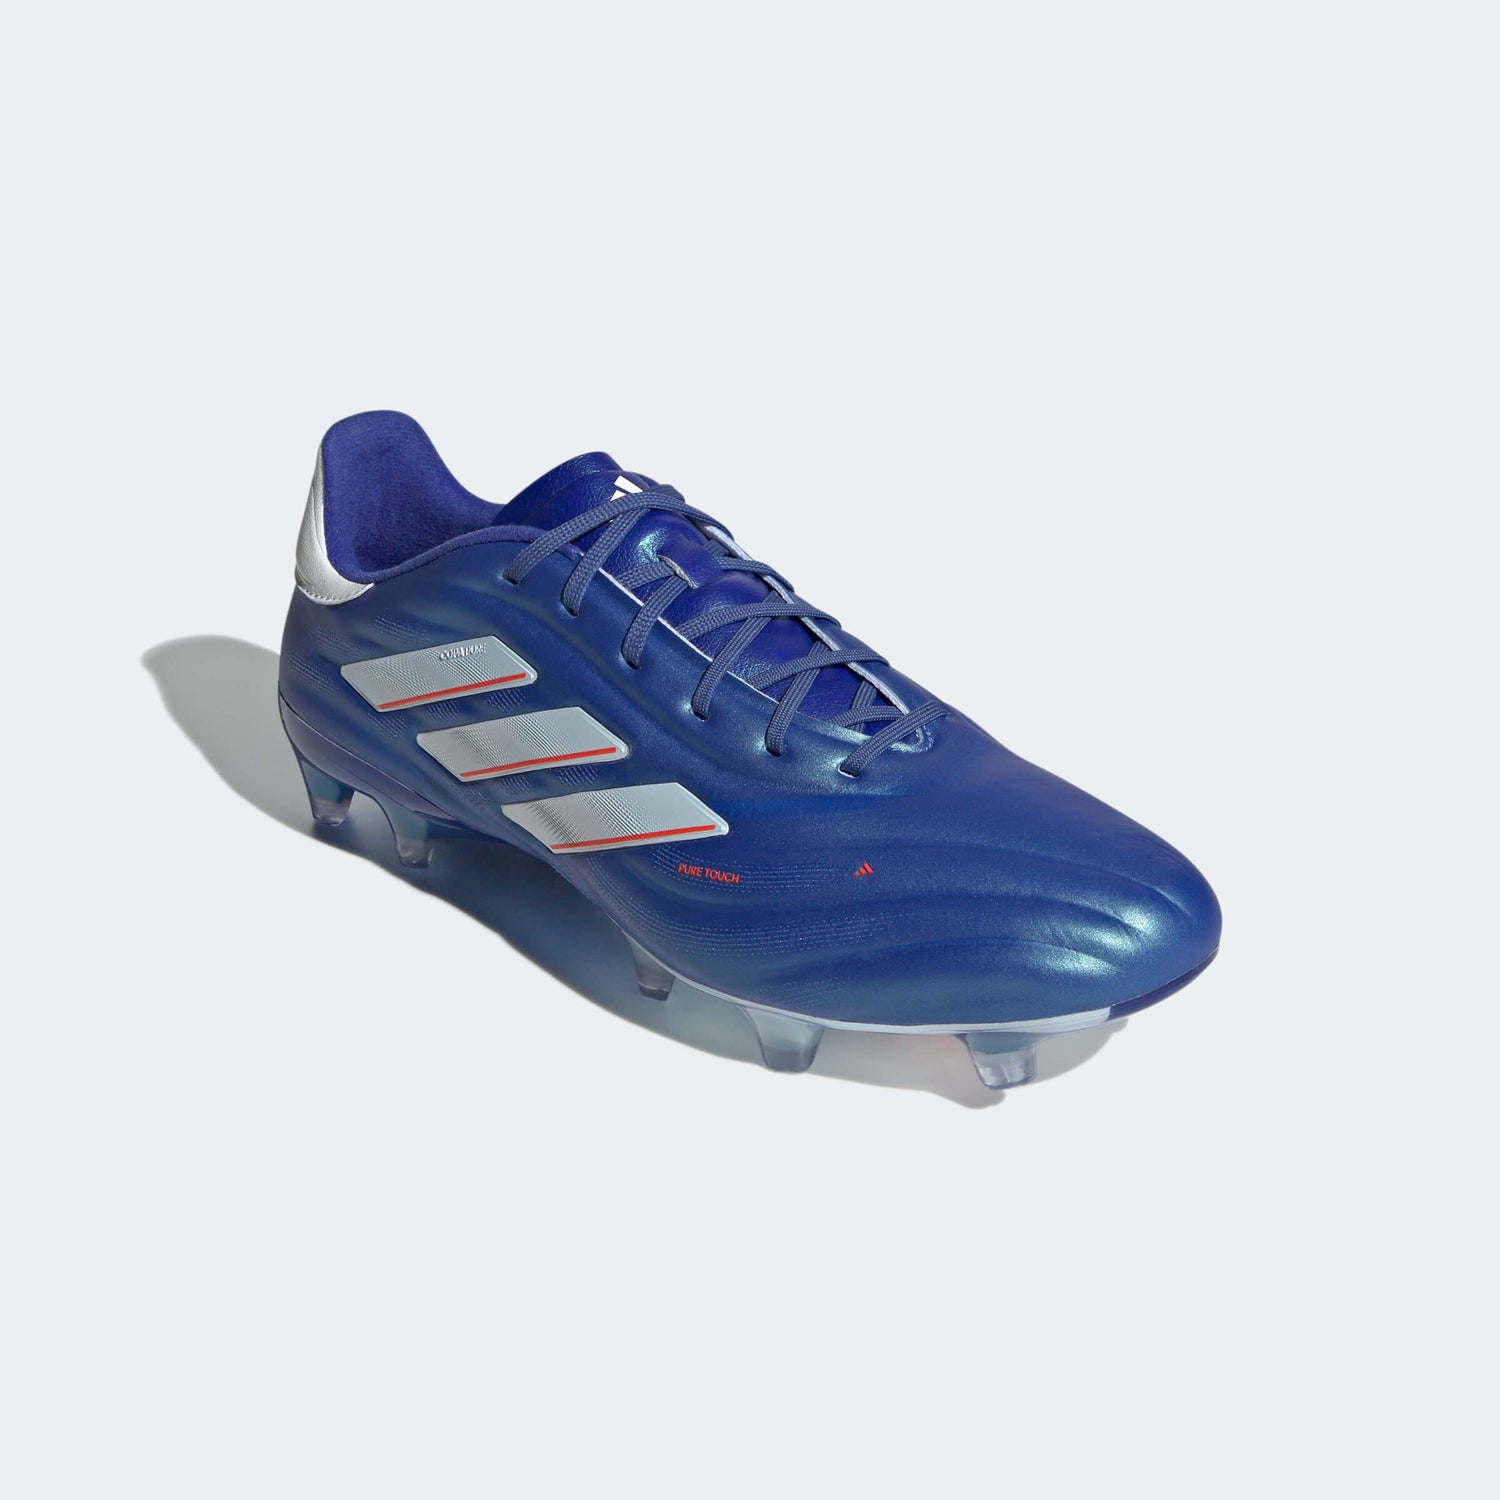 adidas Copa Pure 2.1 FG - Marine Rush Pack (HO23) (Lateral - Front)